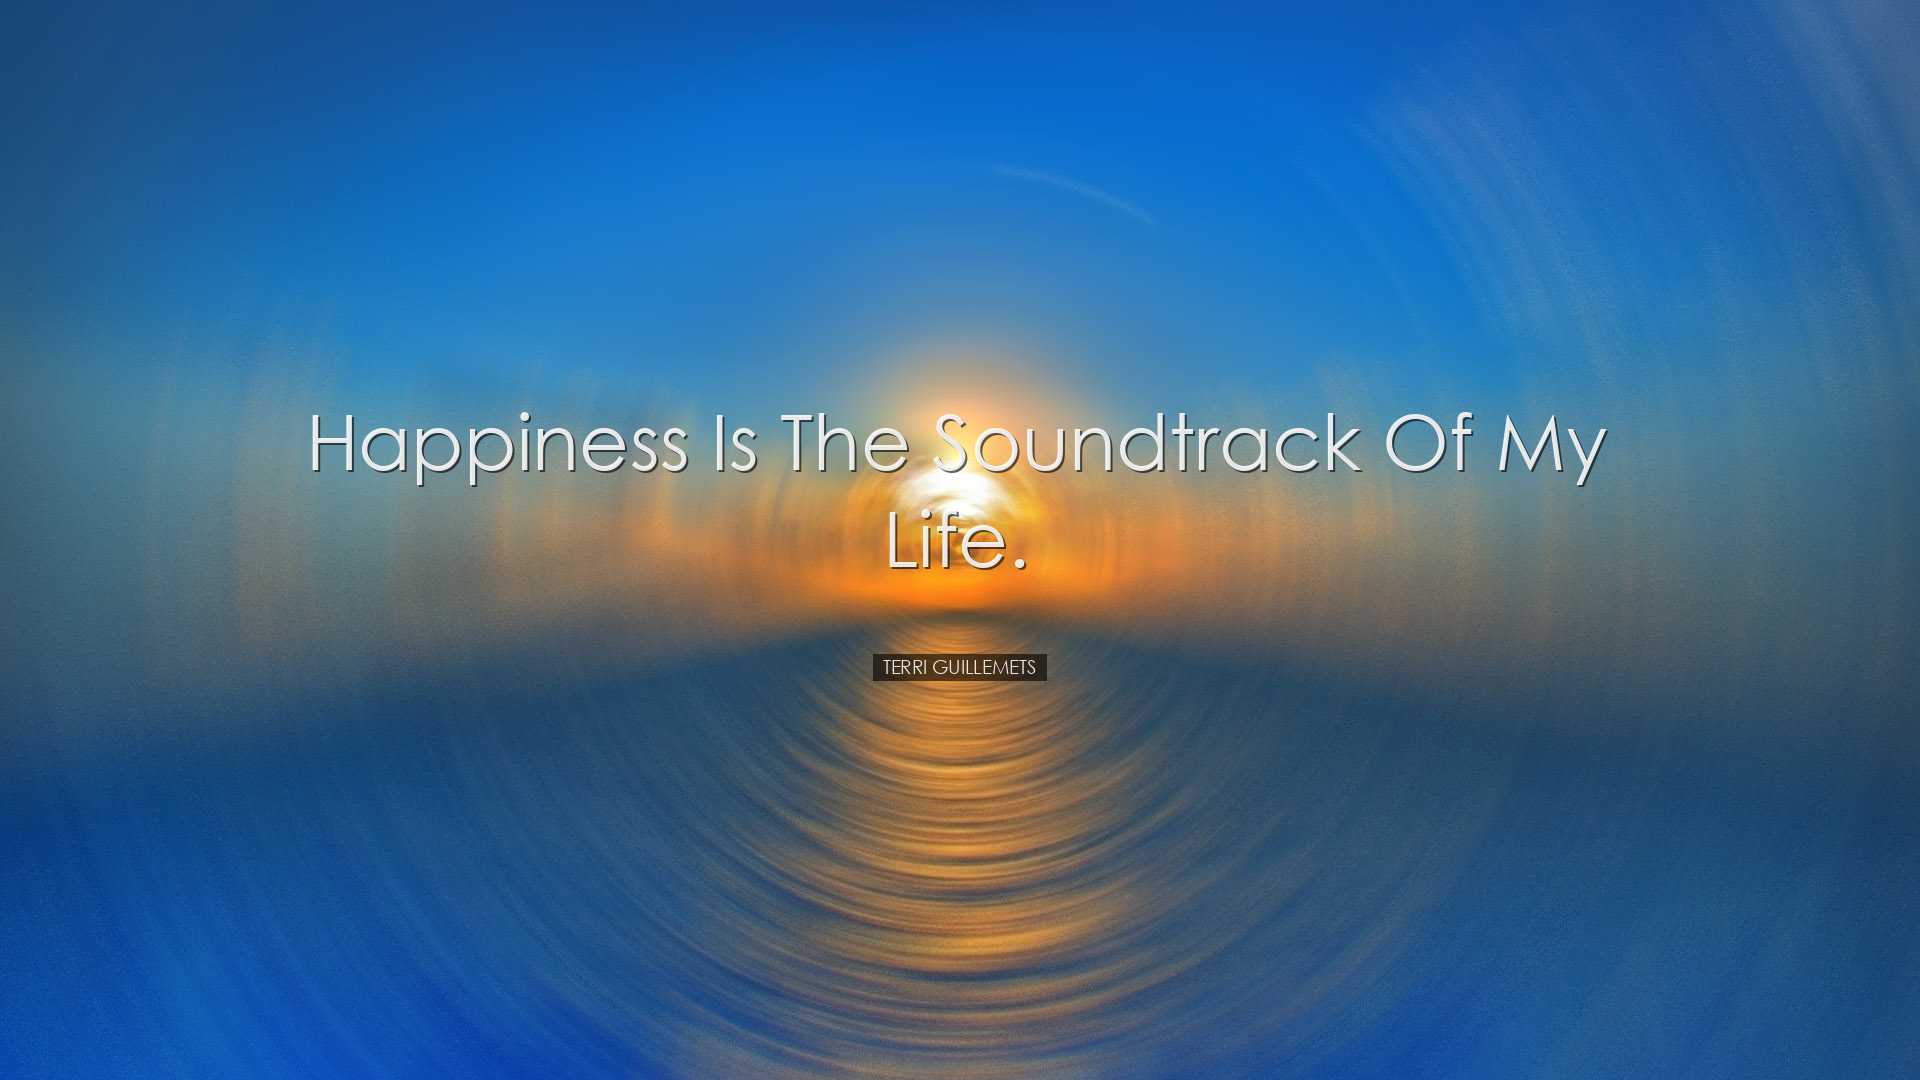 Happiness is the soundtrack of my life. - Terri Guillemets